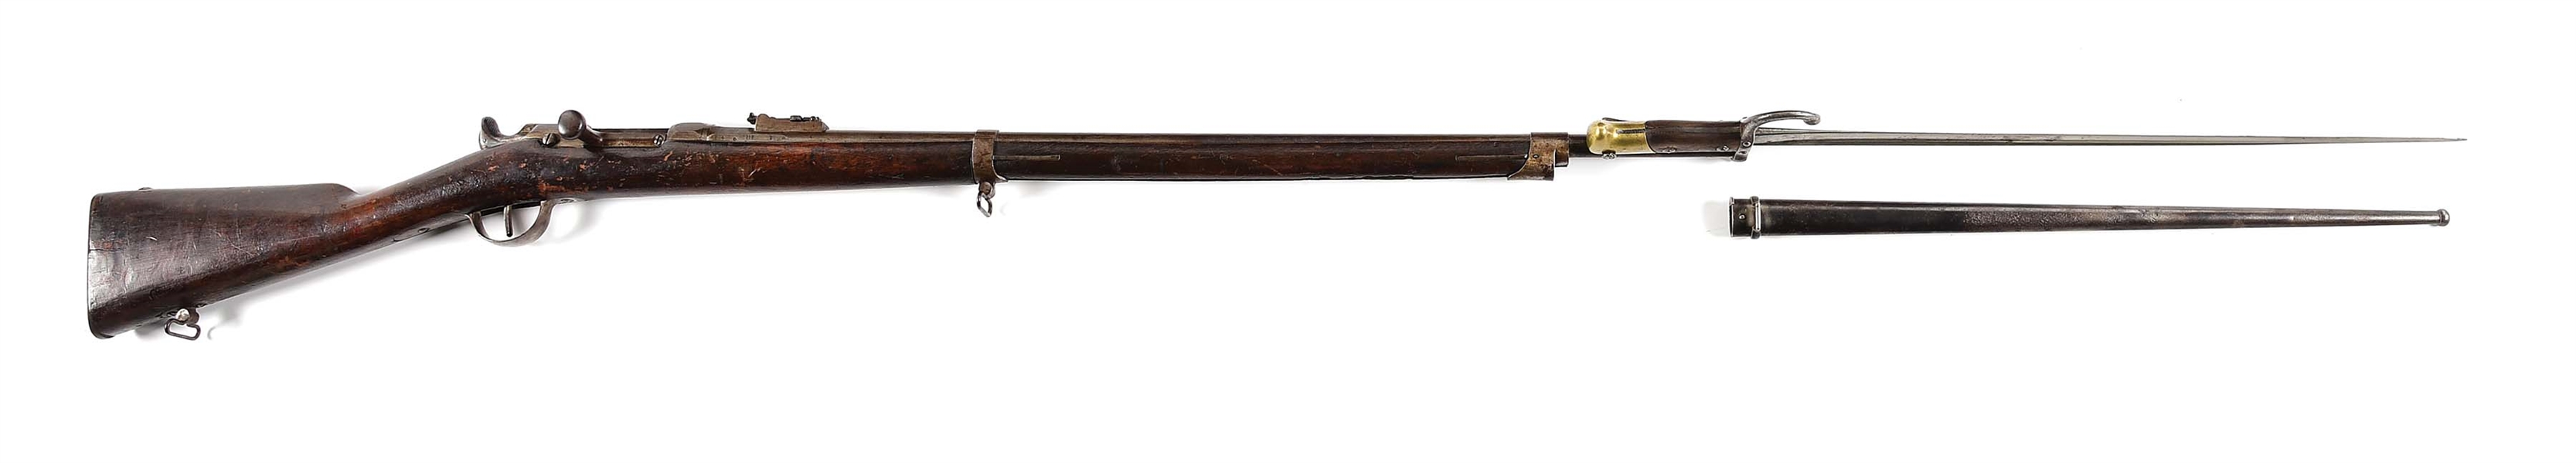 (A) FRENCH MLE 1866 CHASSEPOT BOLT ACTION NEEDLE RIFLE.